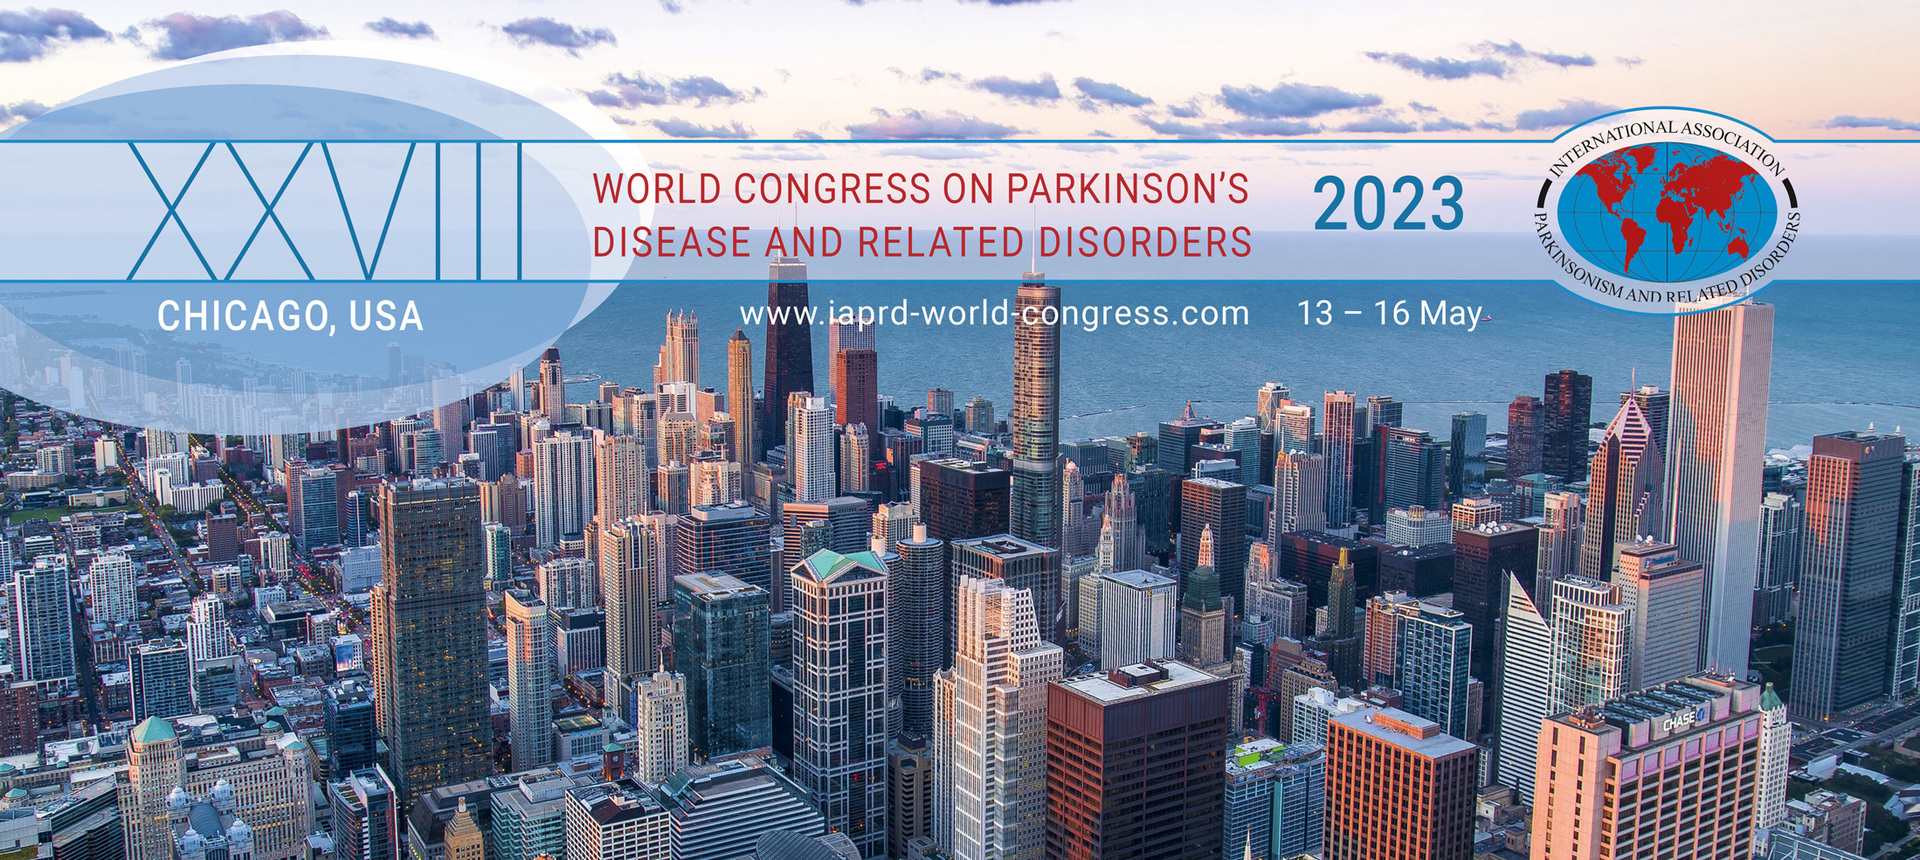 XXVIII World Congress on Parkinson's Disease and Related Disorders 2023, Chicago, Illinois, United States